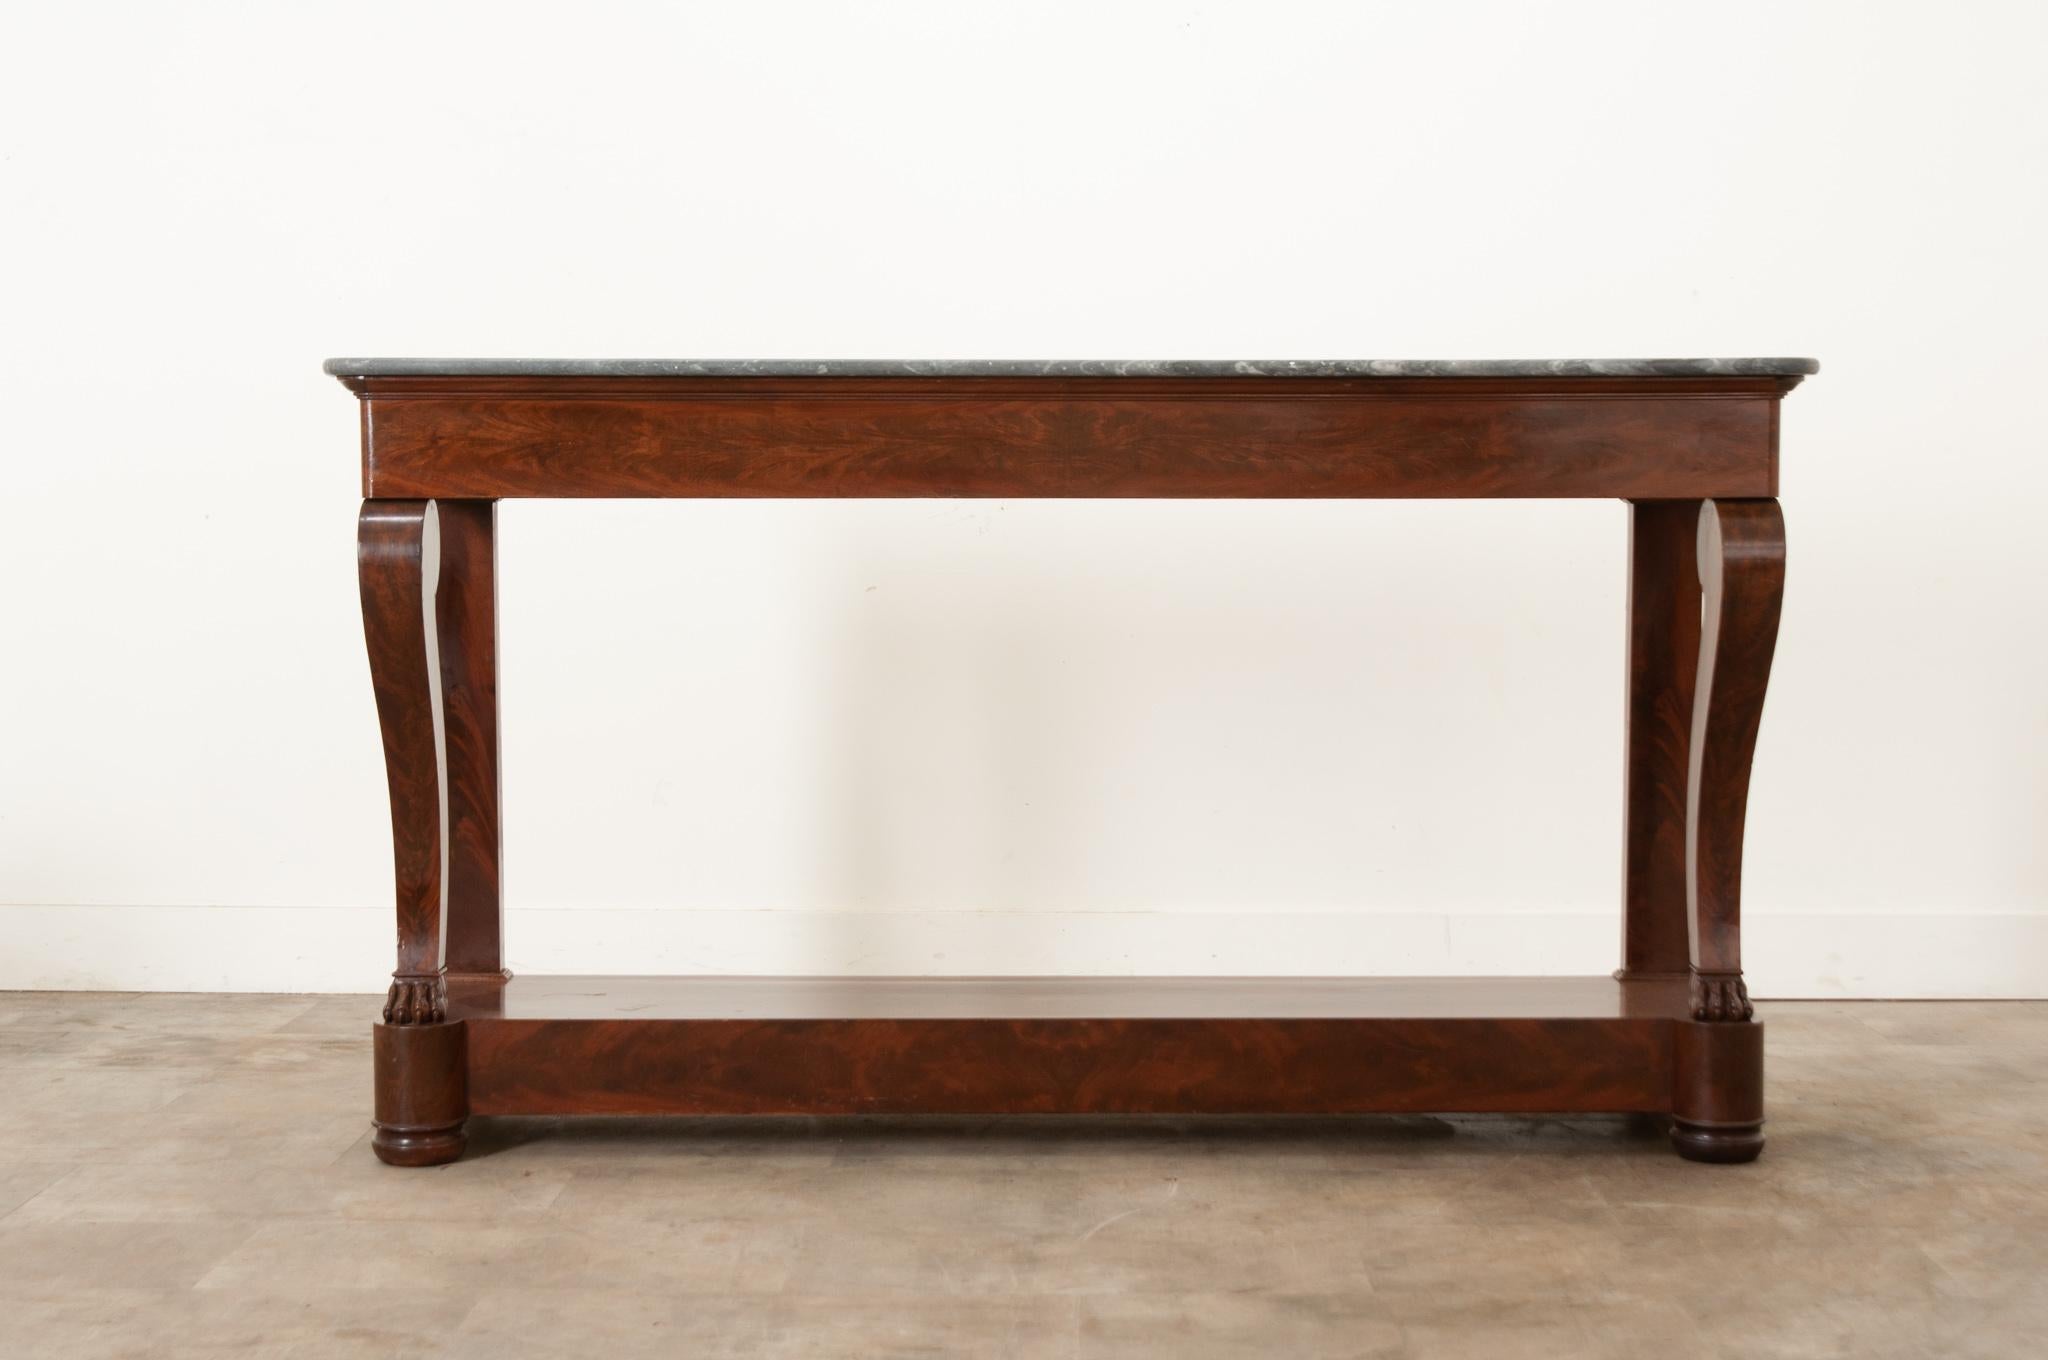 An extraordinary mahogany and marble topped Restauration console – constructed in massive scale – from early 20th century, France. The beautiful piece of antique gray marble has white veins running throughout and rounded front corners which are